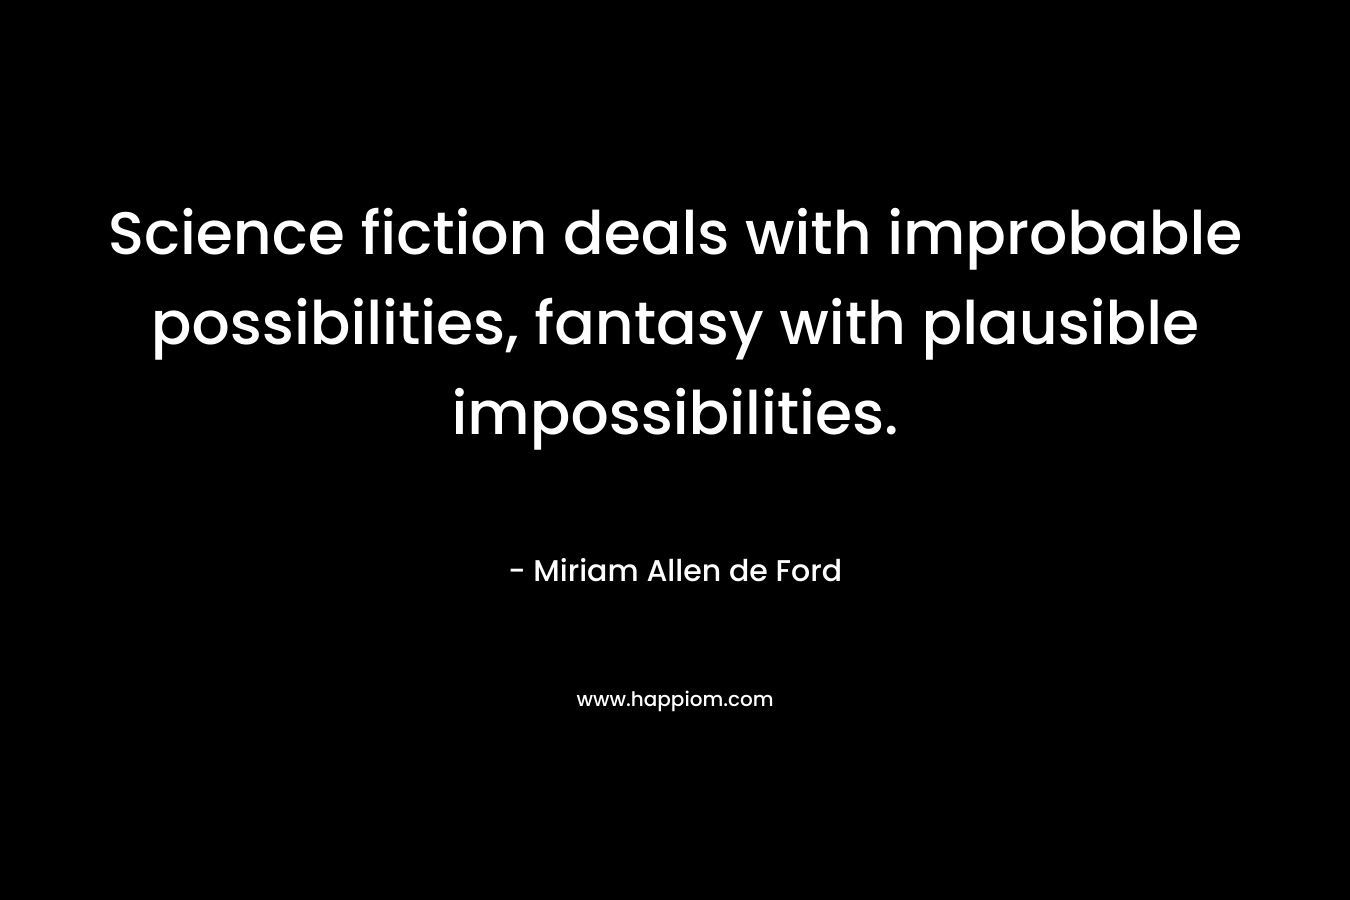 Science fiction deals with improbable possibilities, fantasy with plausible impossibilities.